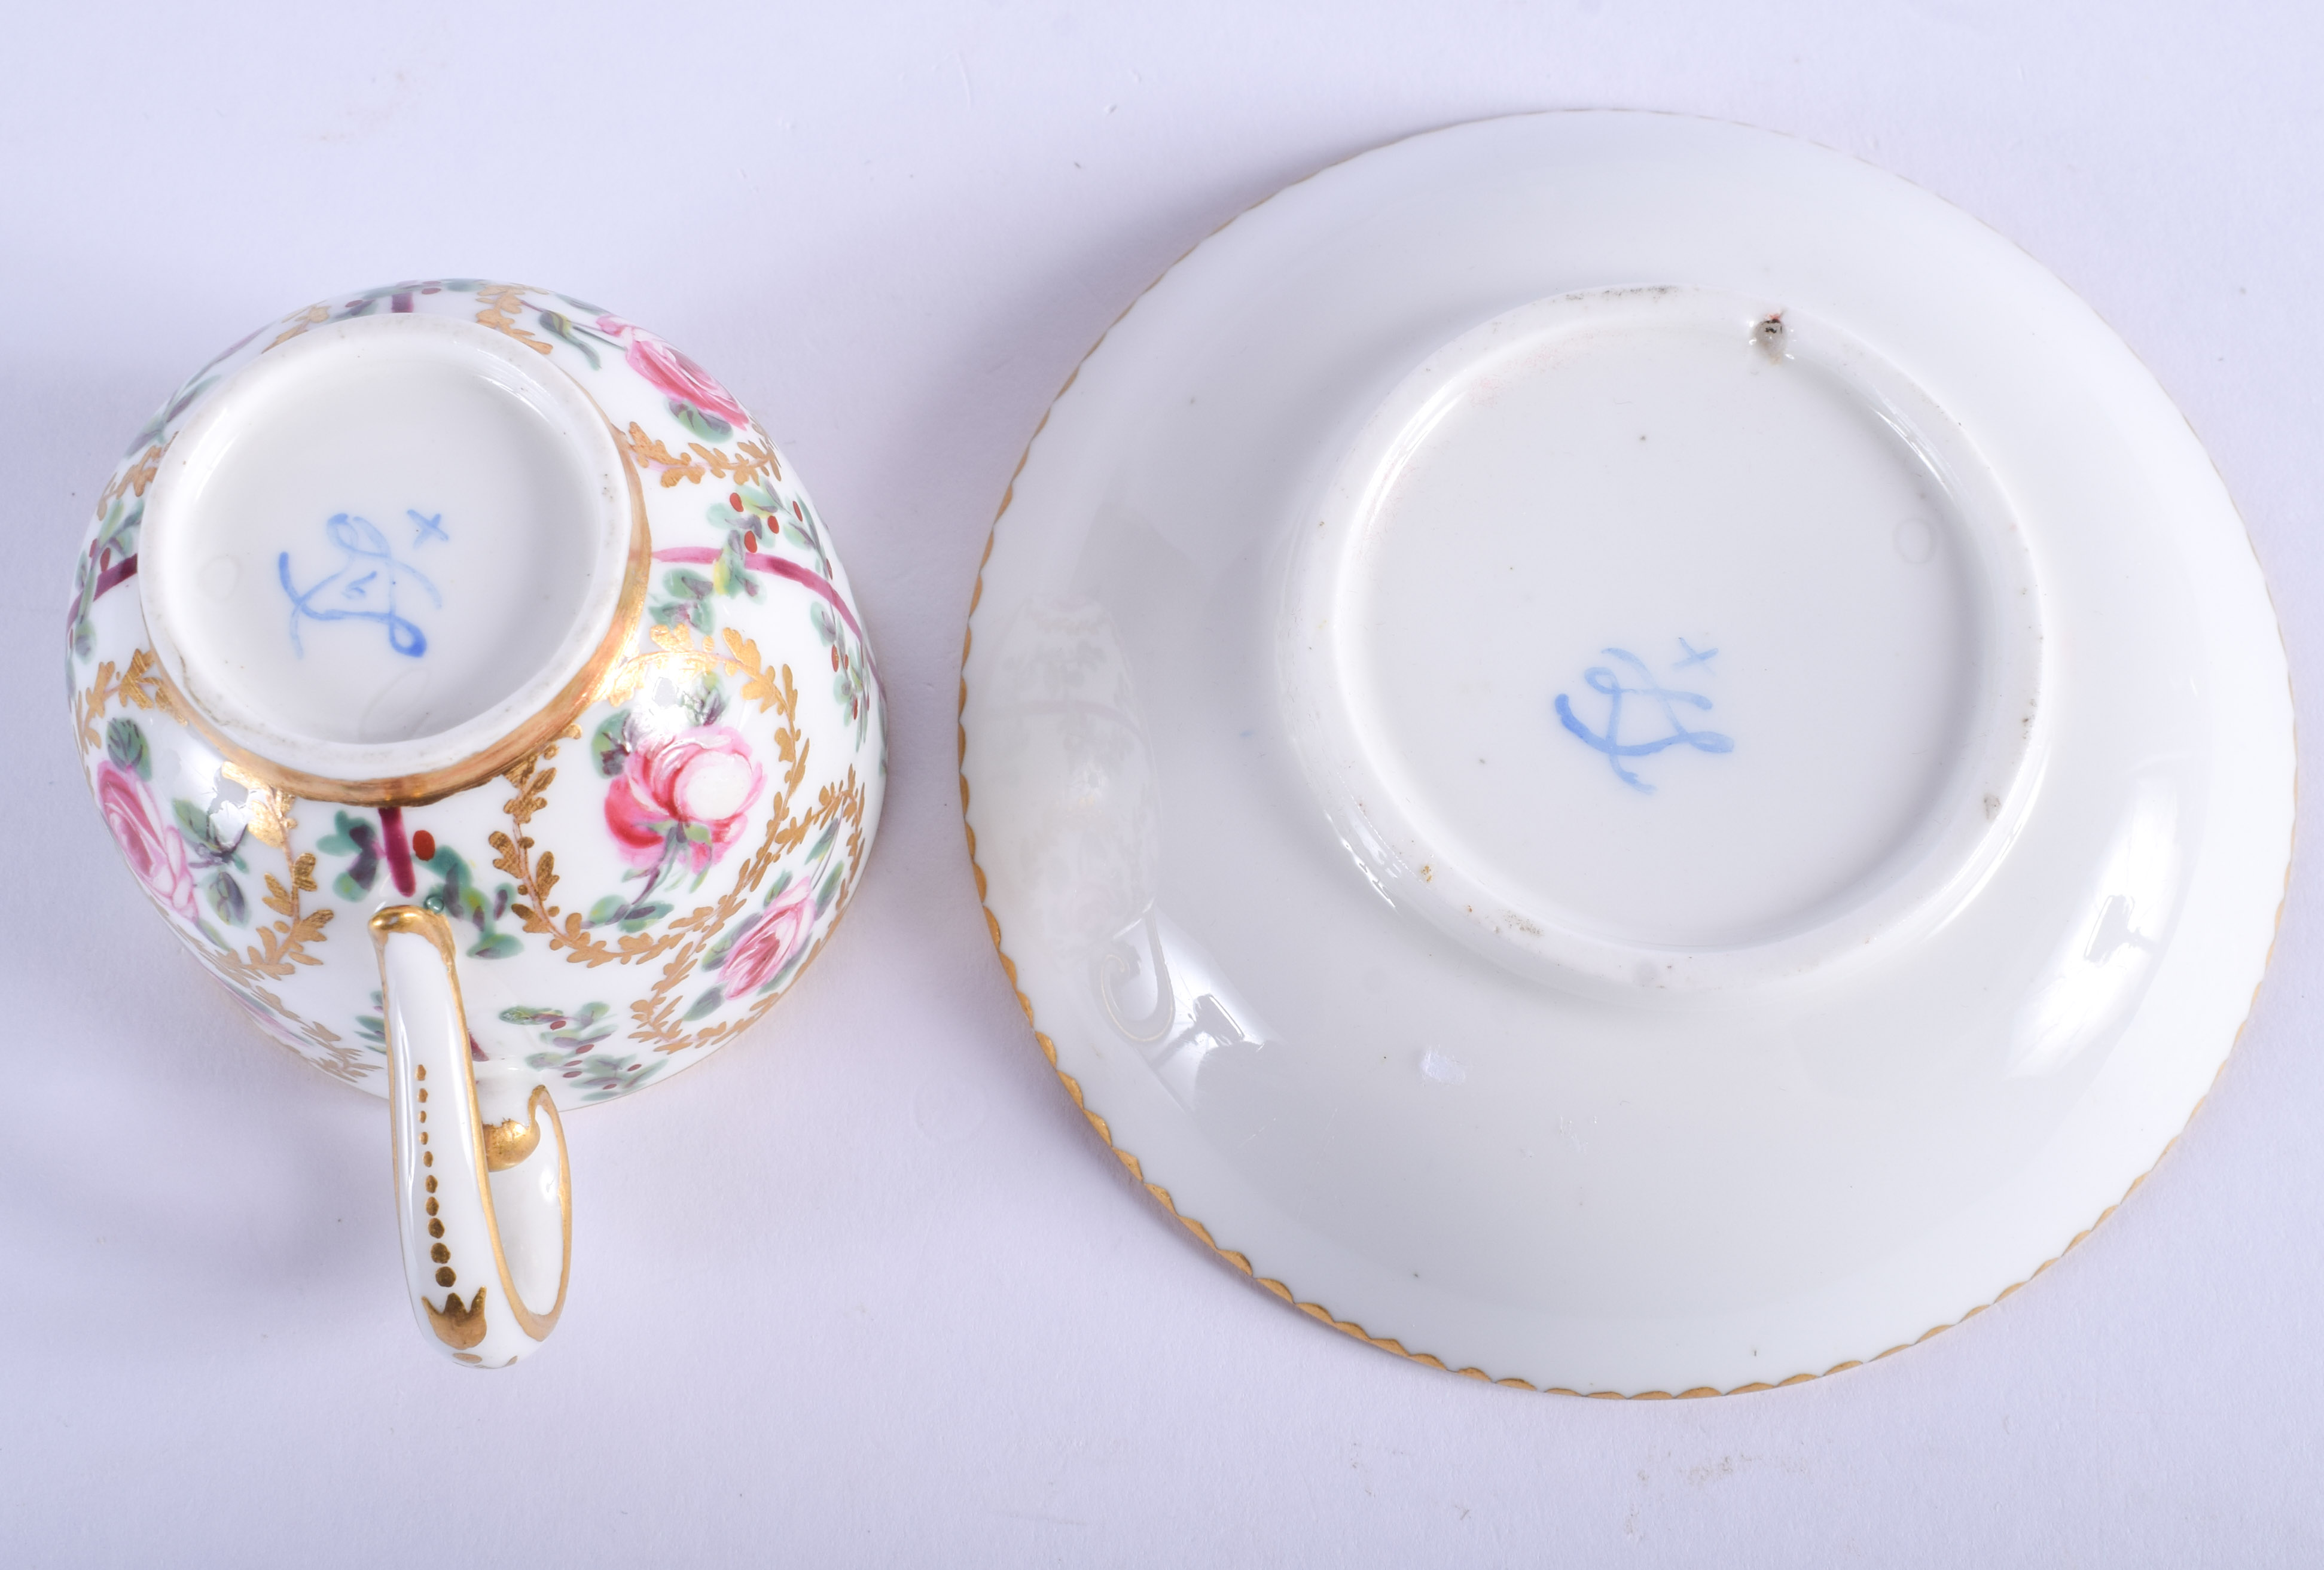 AN 18TH CENTURY SEVRES PORCELAIN CUP AND SAUCER painted with roses and gilt vines. (2) - Image 3 of 3